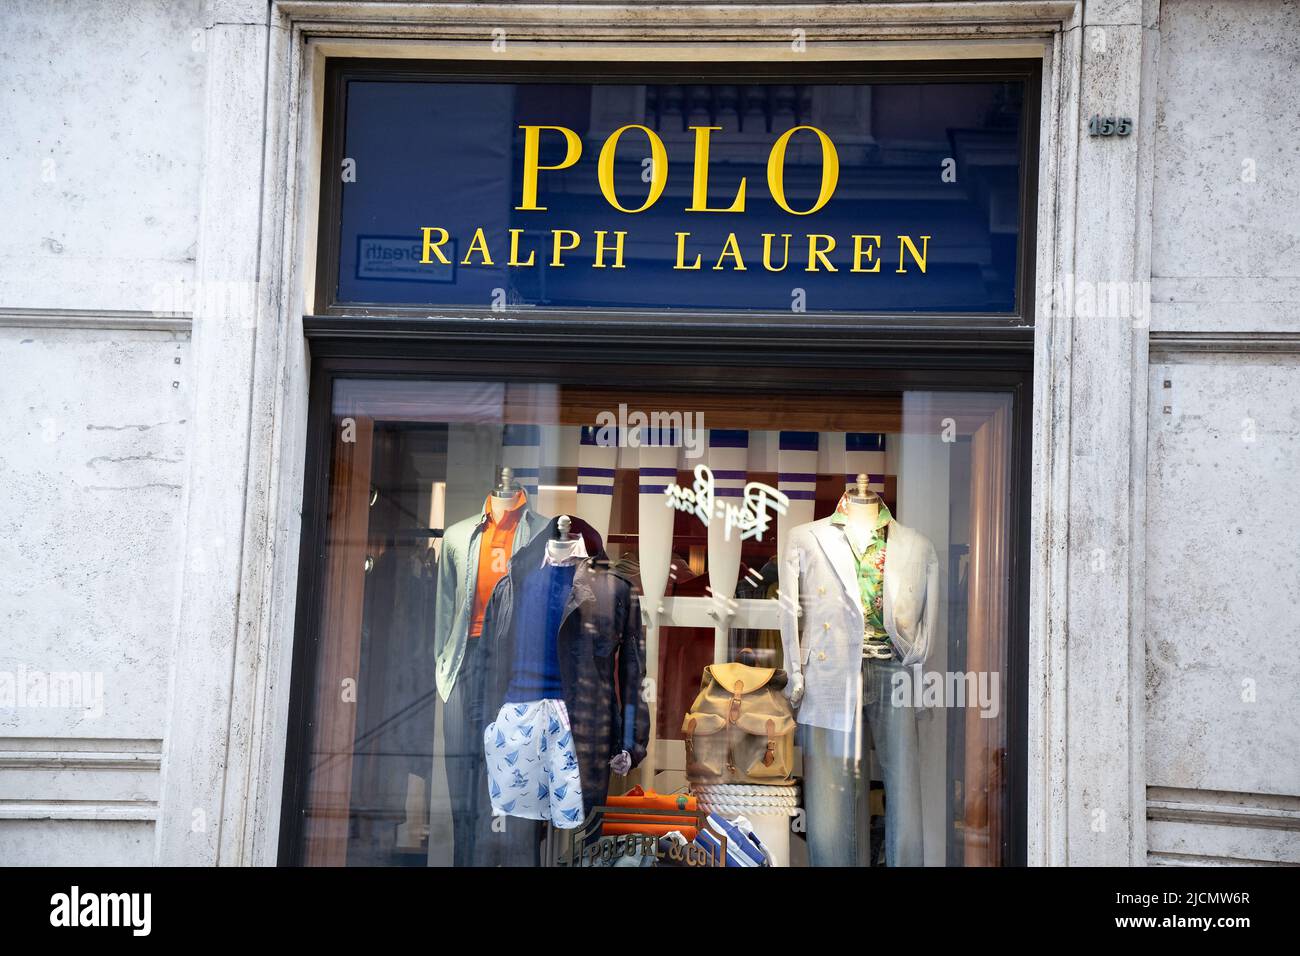 Polo ralph lauren sign hi-res stock photography and images - Page 2 - Alamy